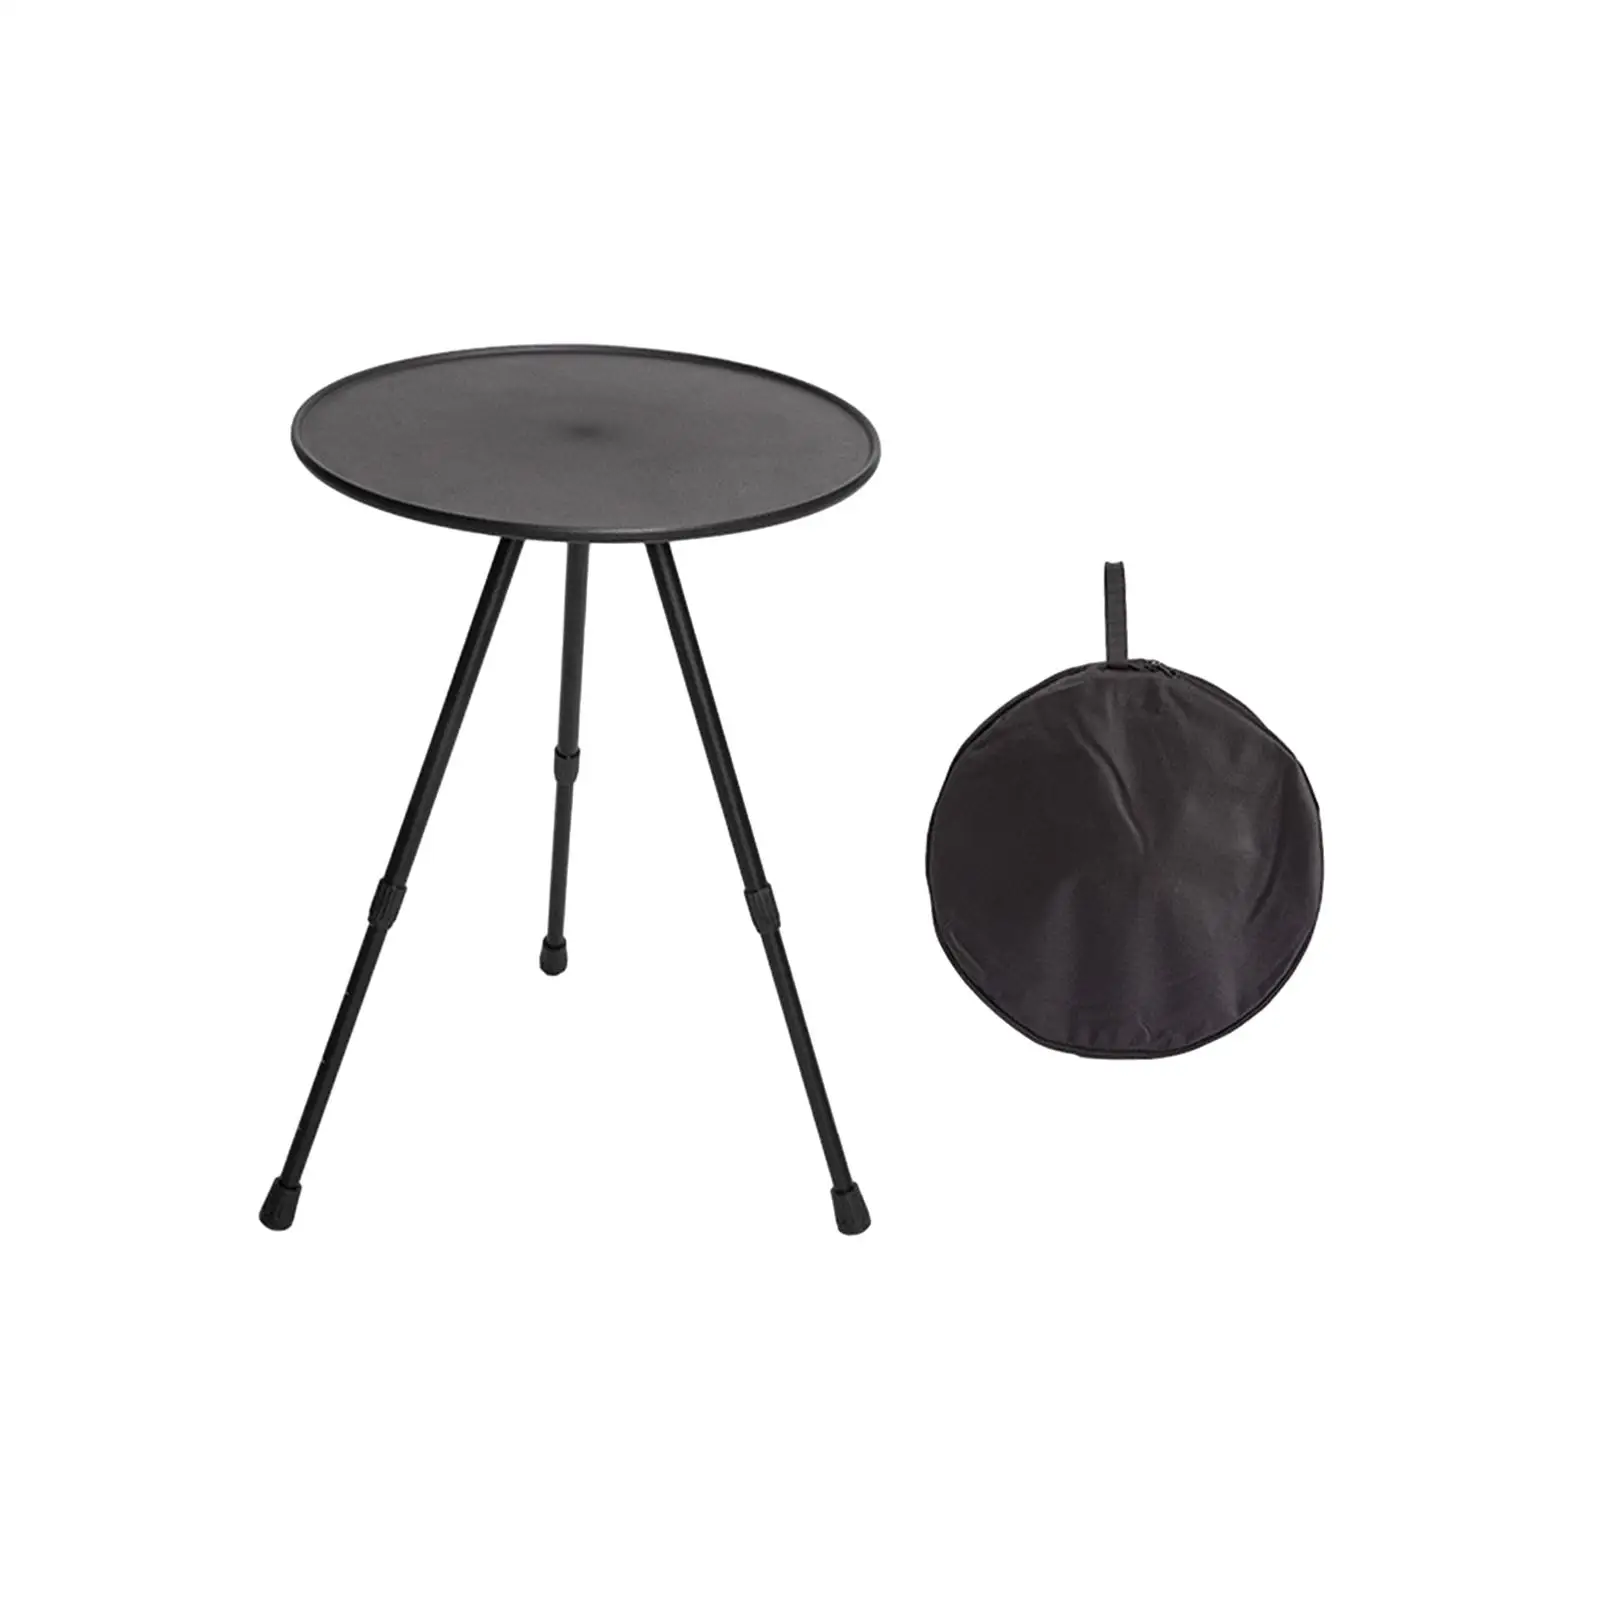 Triangular Round Table Multifunctional Durable Postmodern Furniture Small Camping Tables Backpacking Picnic Kitchen BBQ